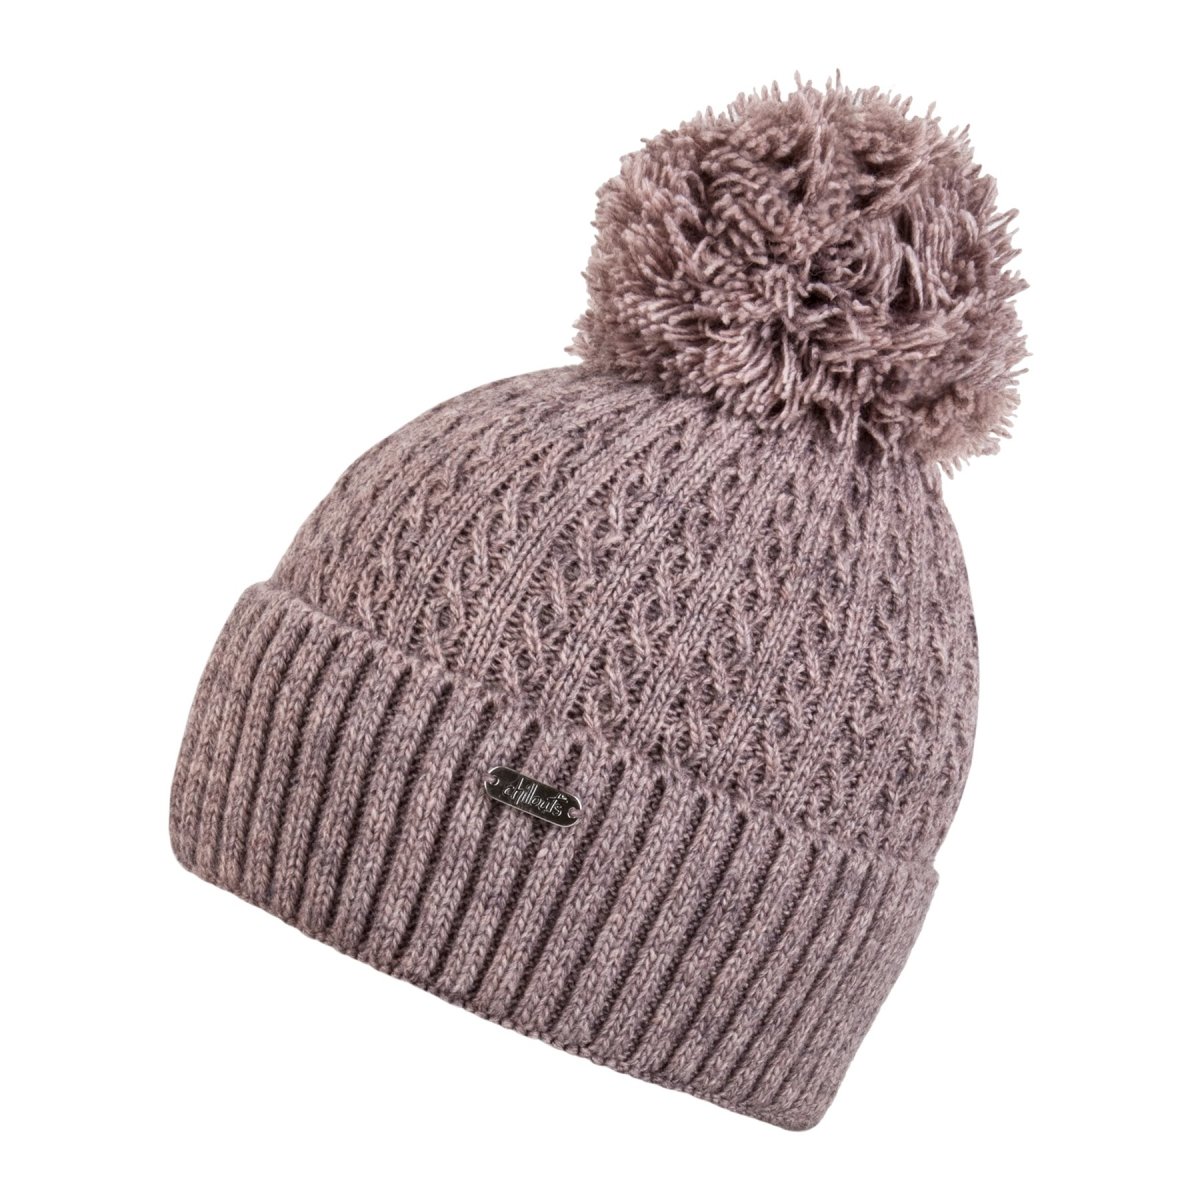 colors Headwear Bobble – fleece & natural hat Chillouts with bobble removable in lining